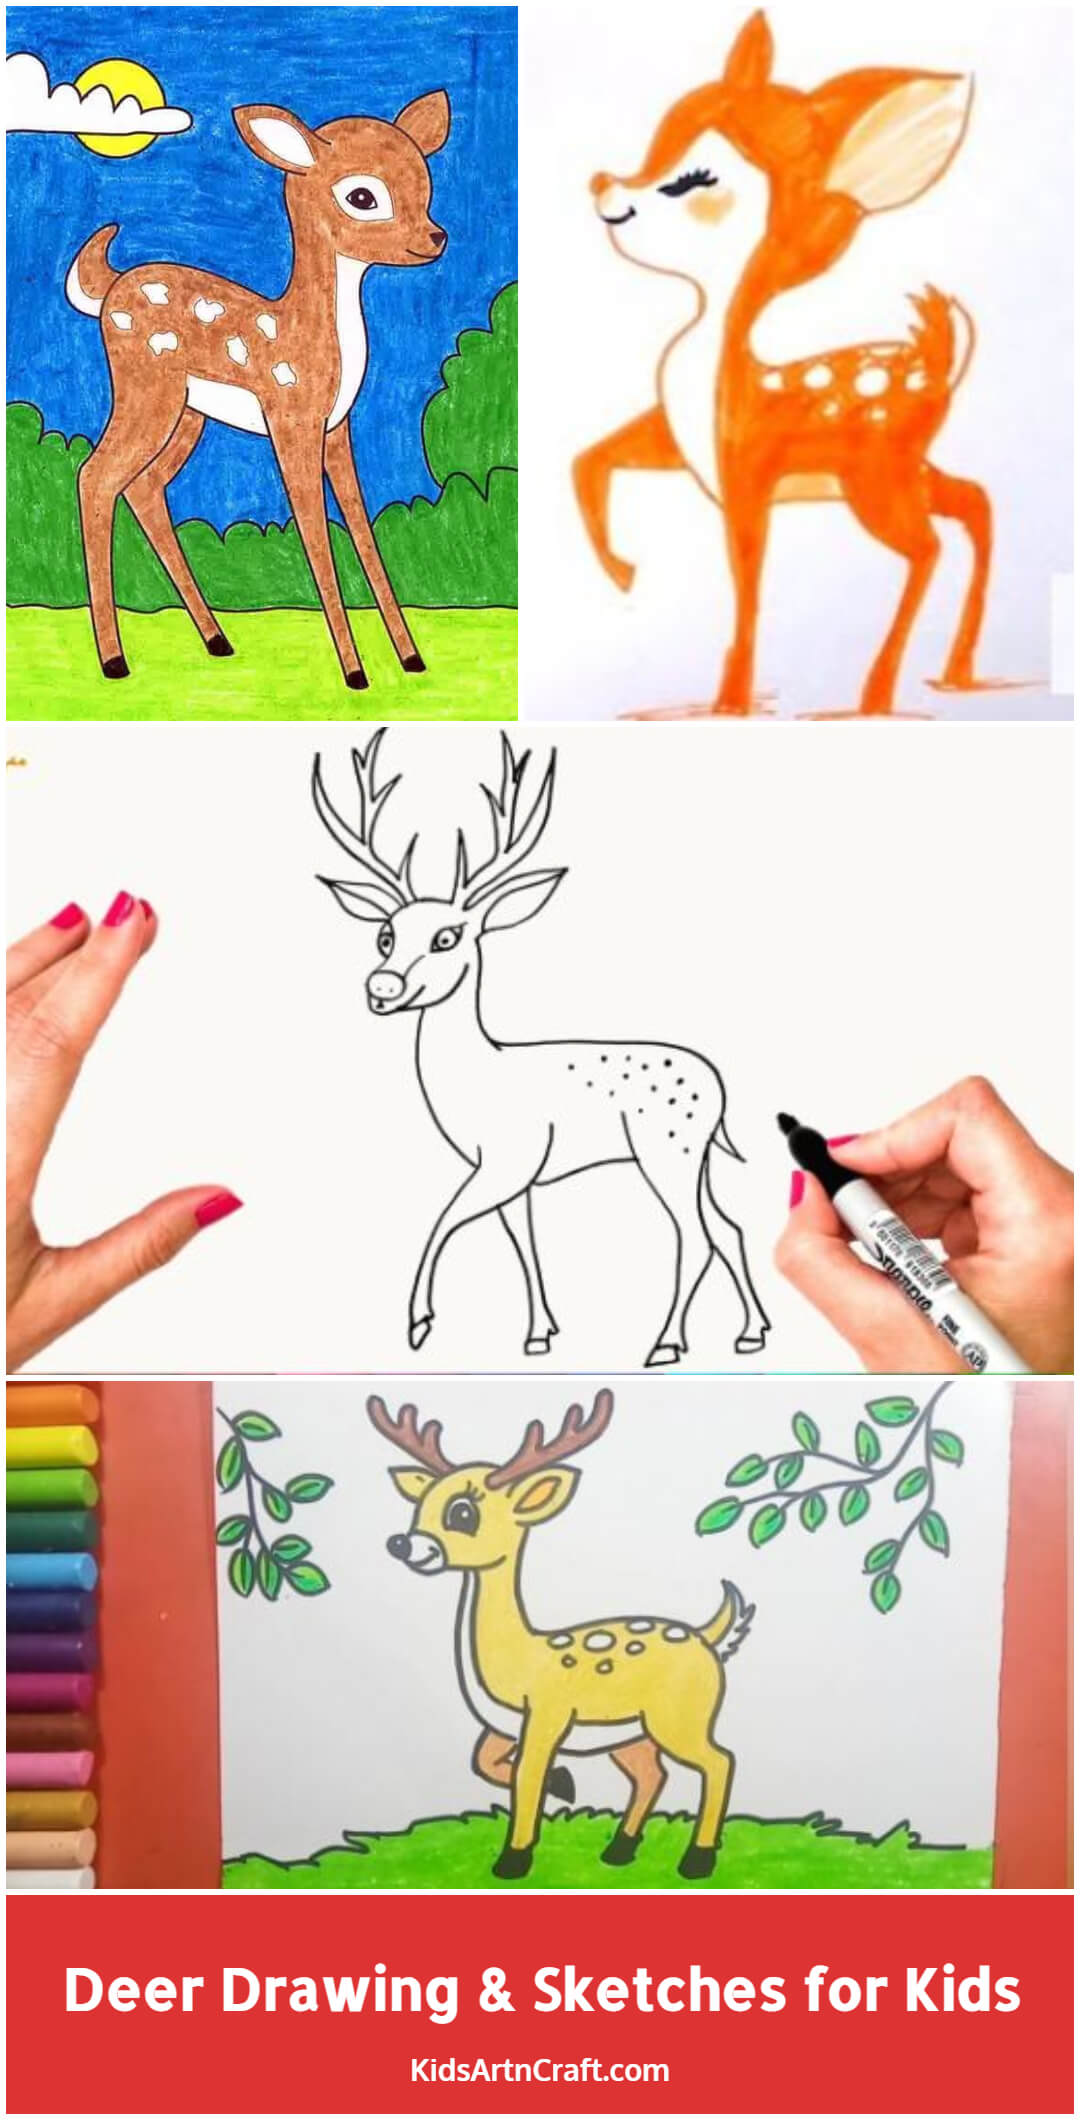 How to Draw a Deer - Really Easy Drawing Tutorial